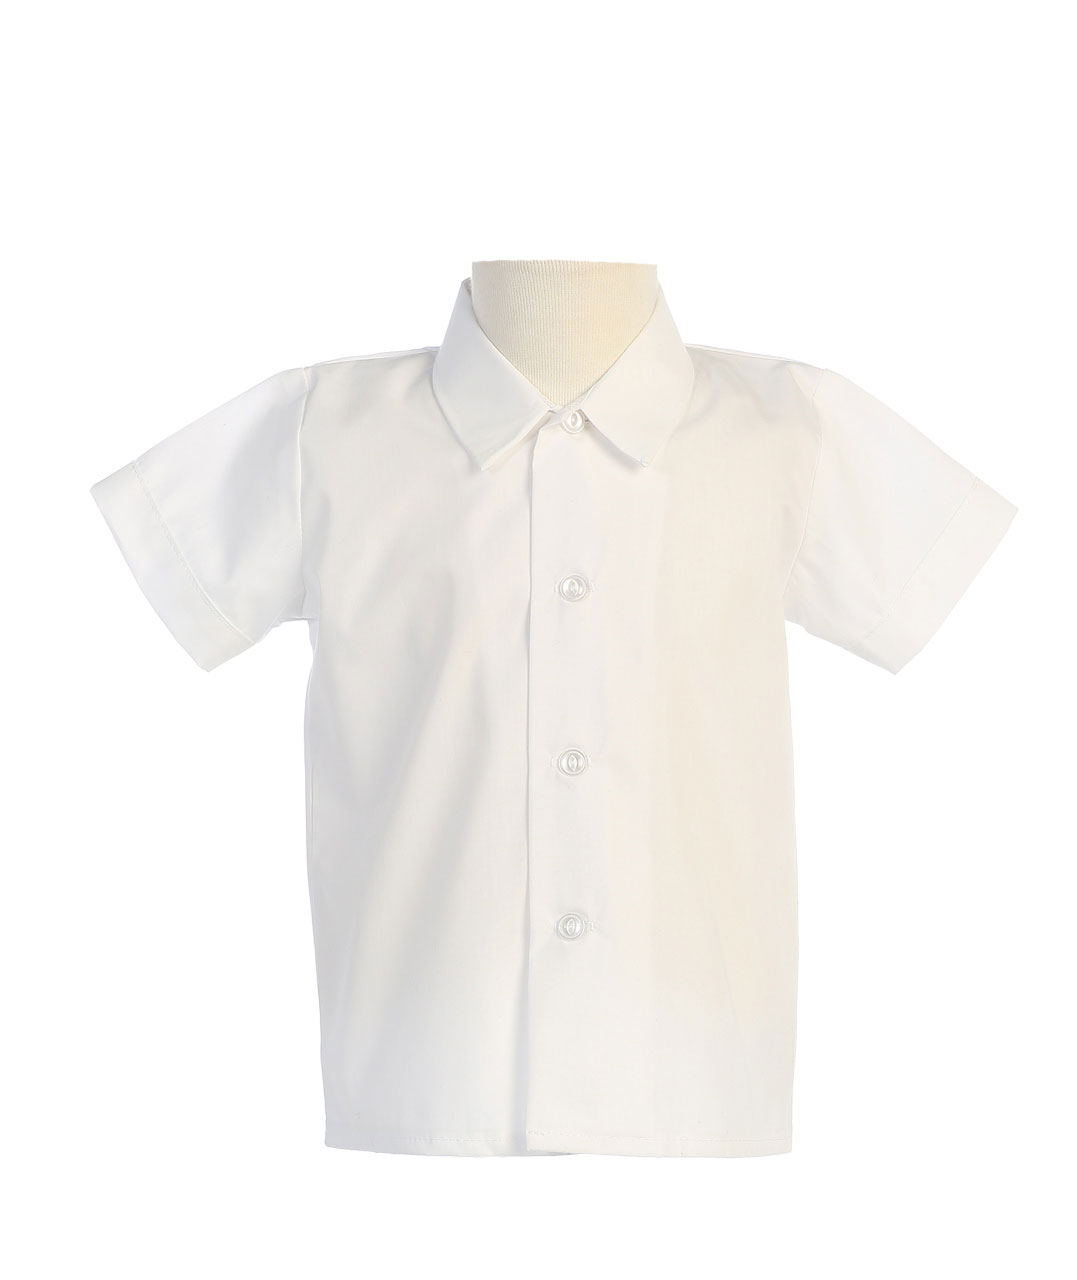 Boys Short Sleeved Simple Dress Shirt - Available in White 2T